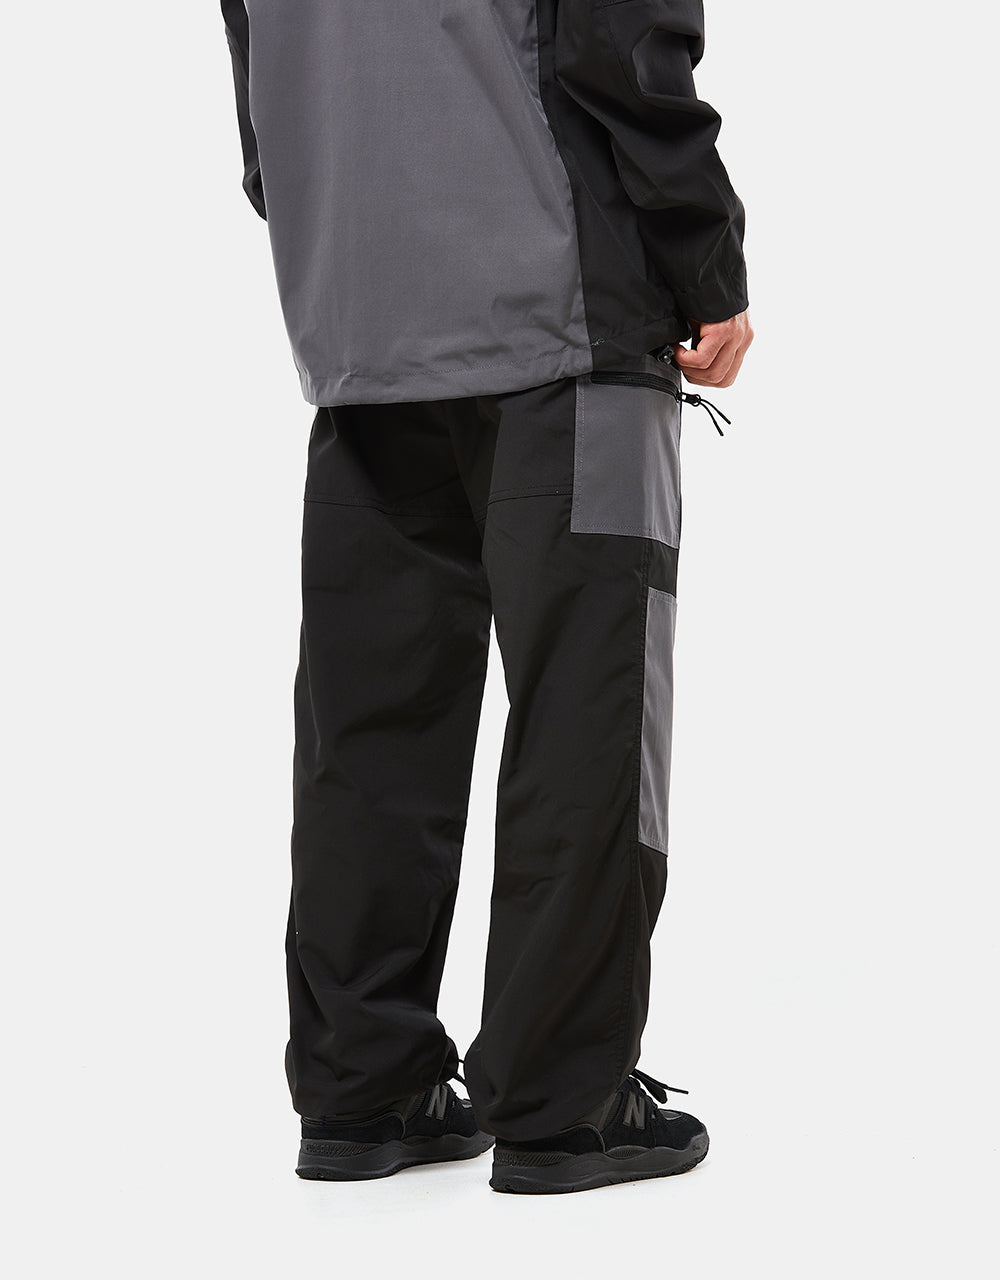 Route One Explorer Pant - Charcoal